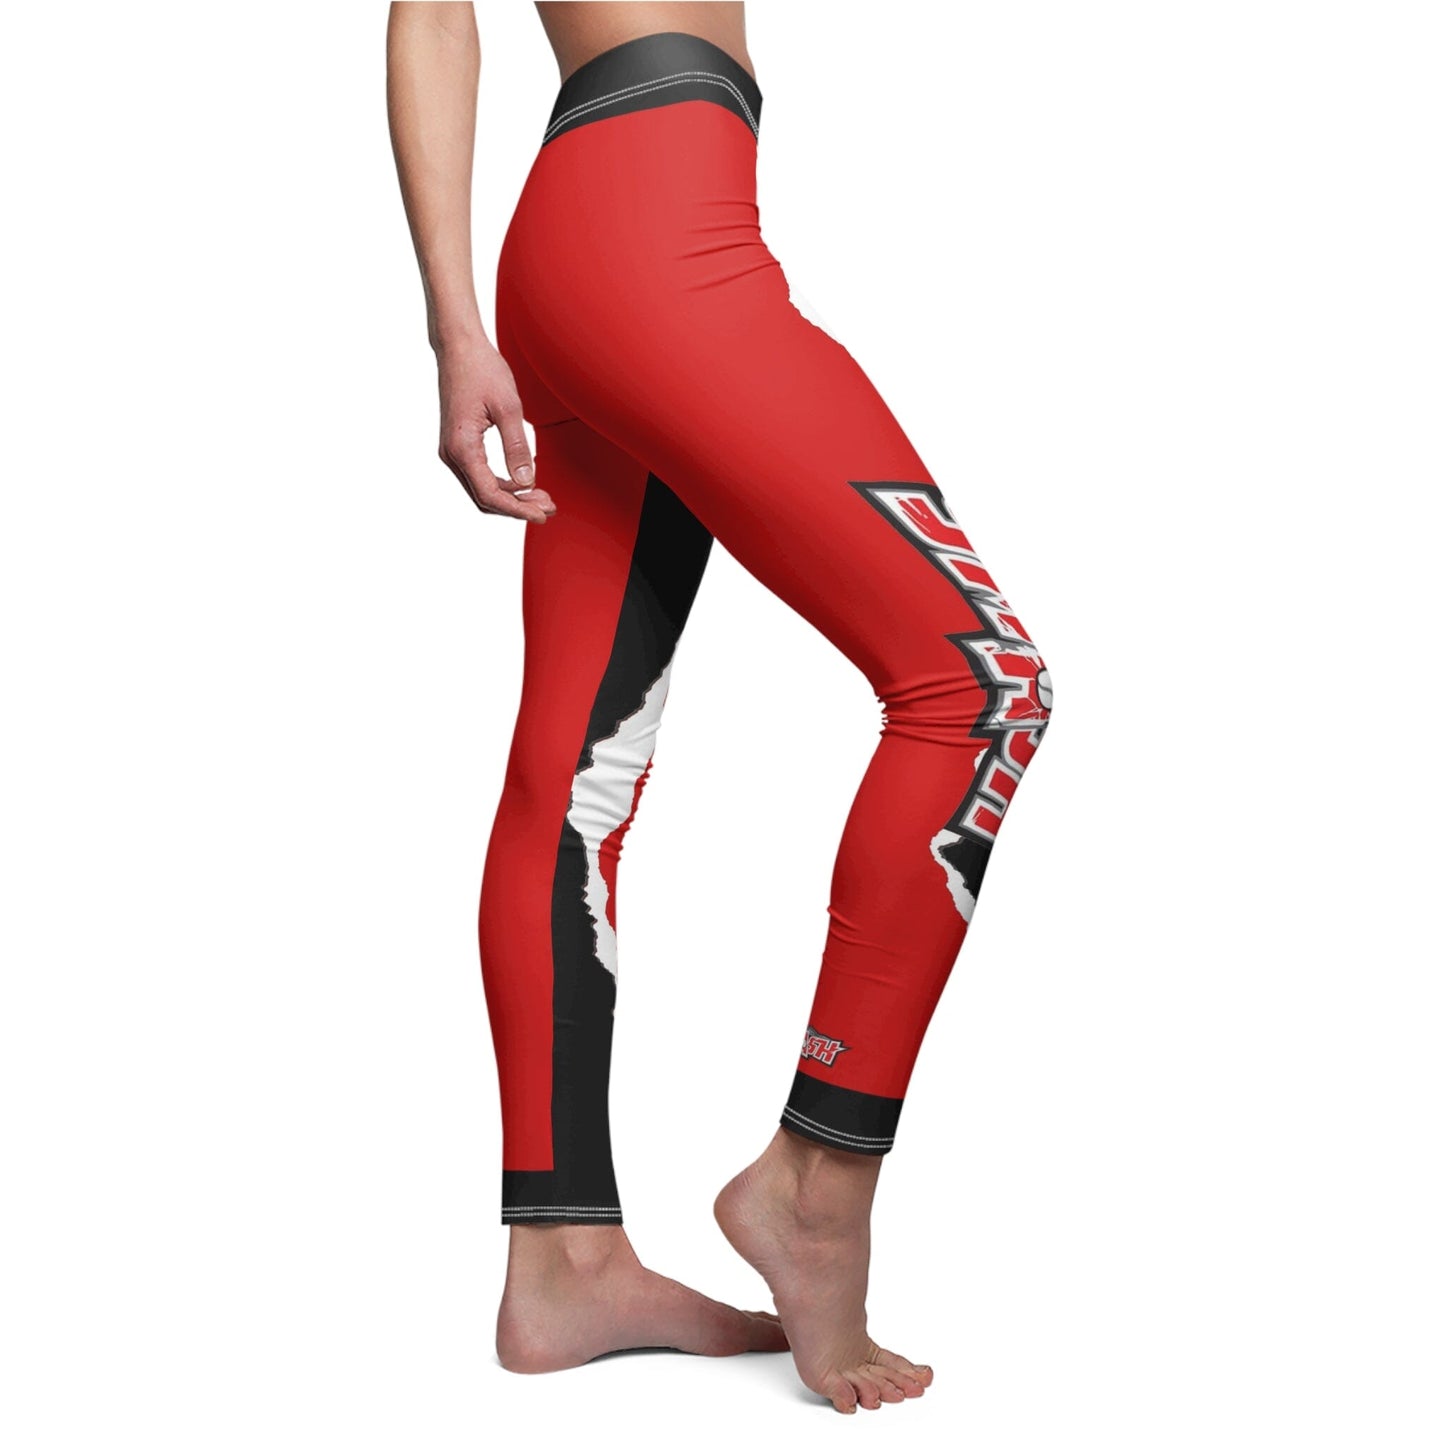 RIPPED - Women's Full Sublimated Sportswear Leggings-Photoshop Template - PSMGraphix